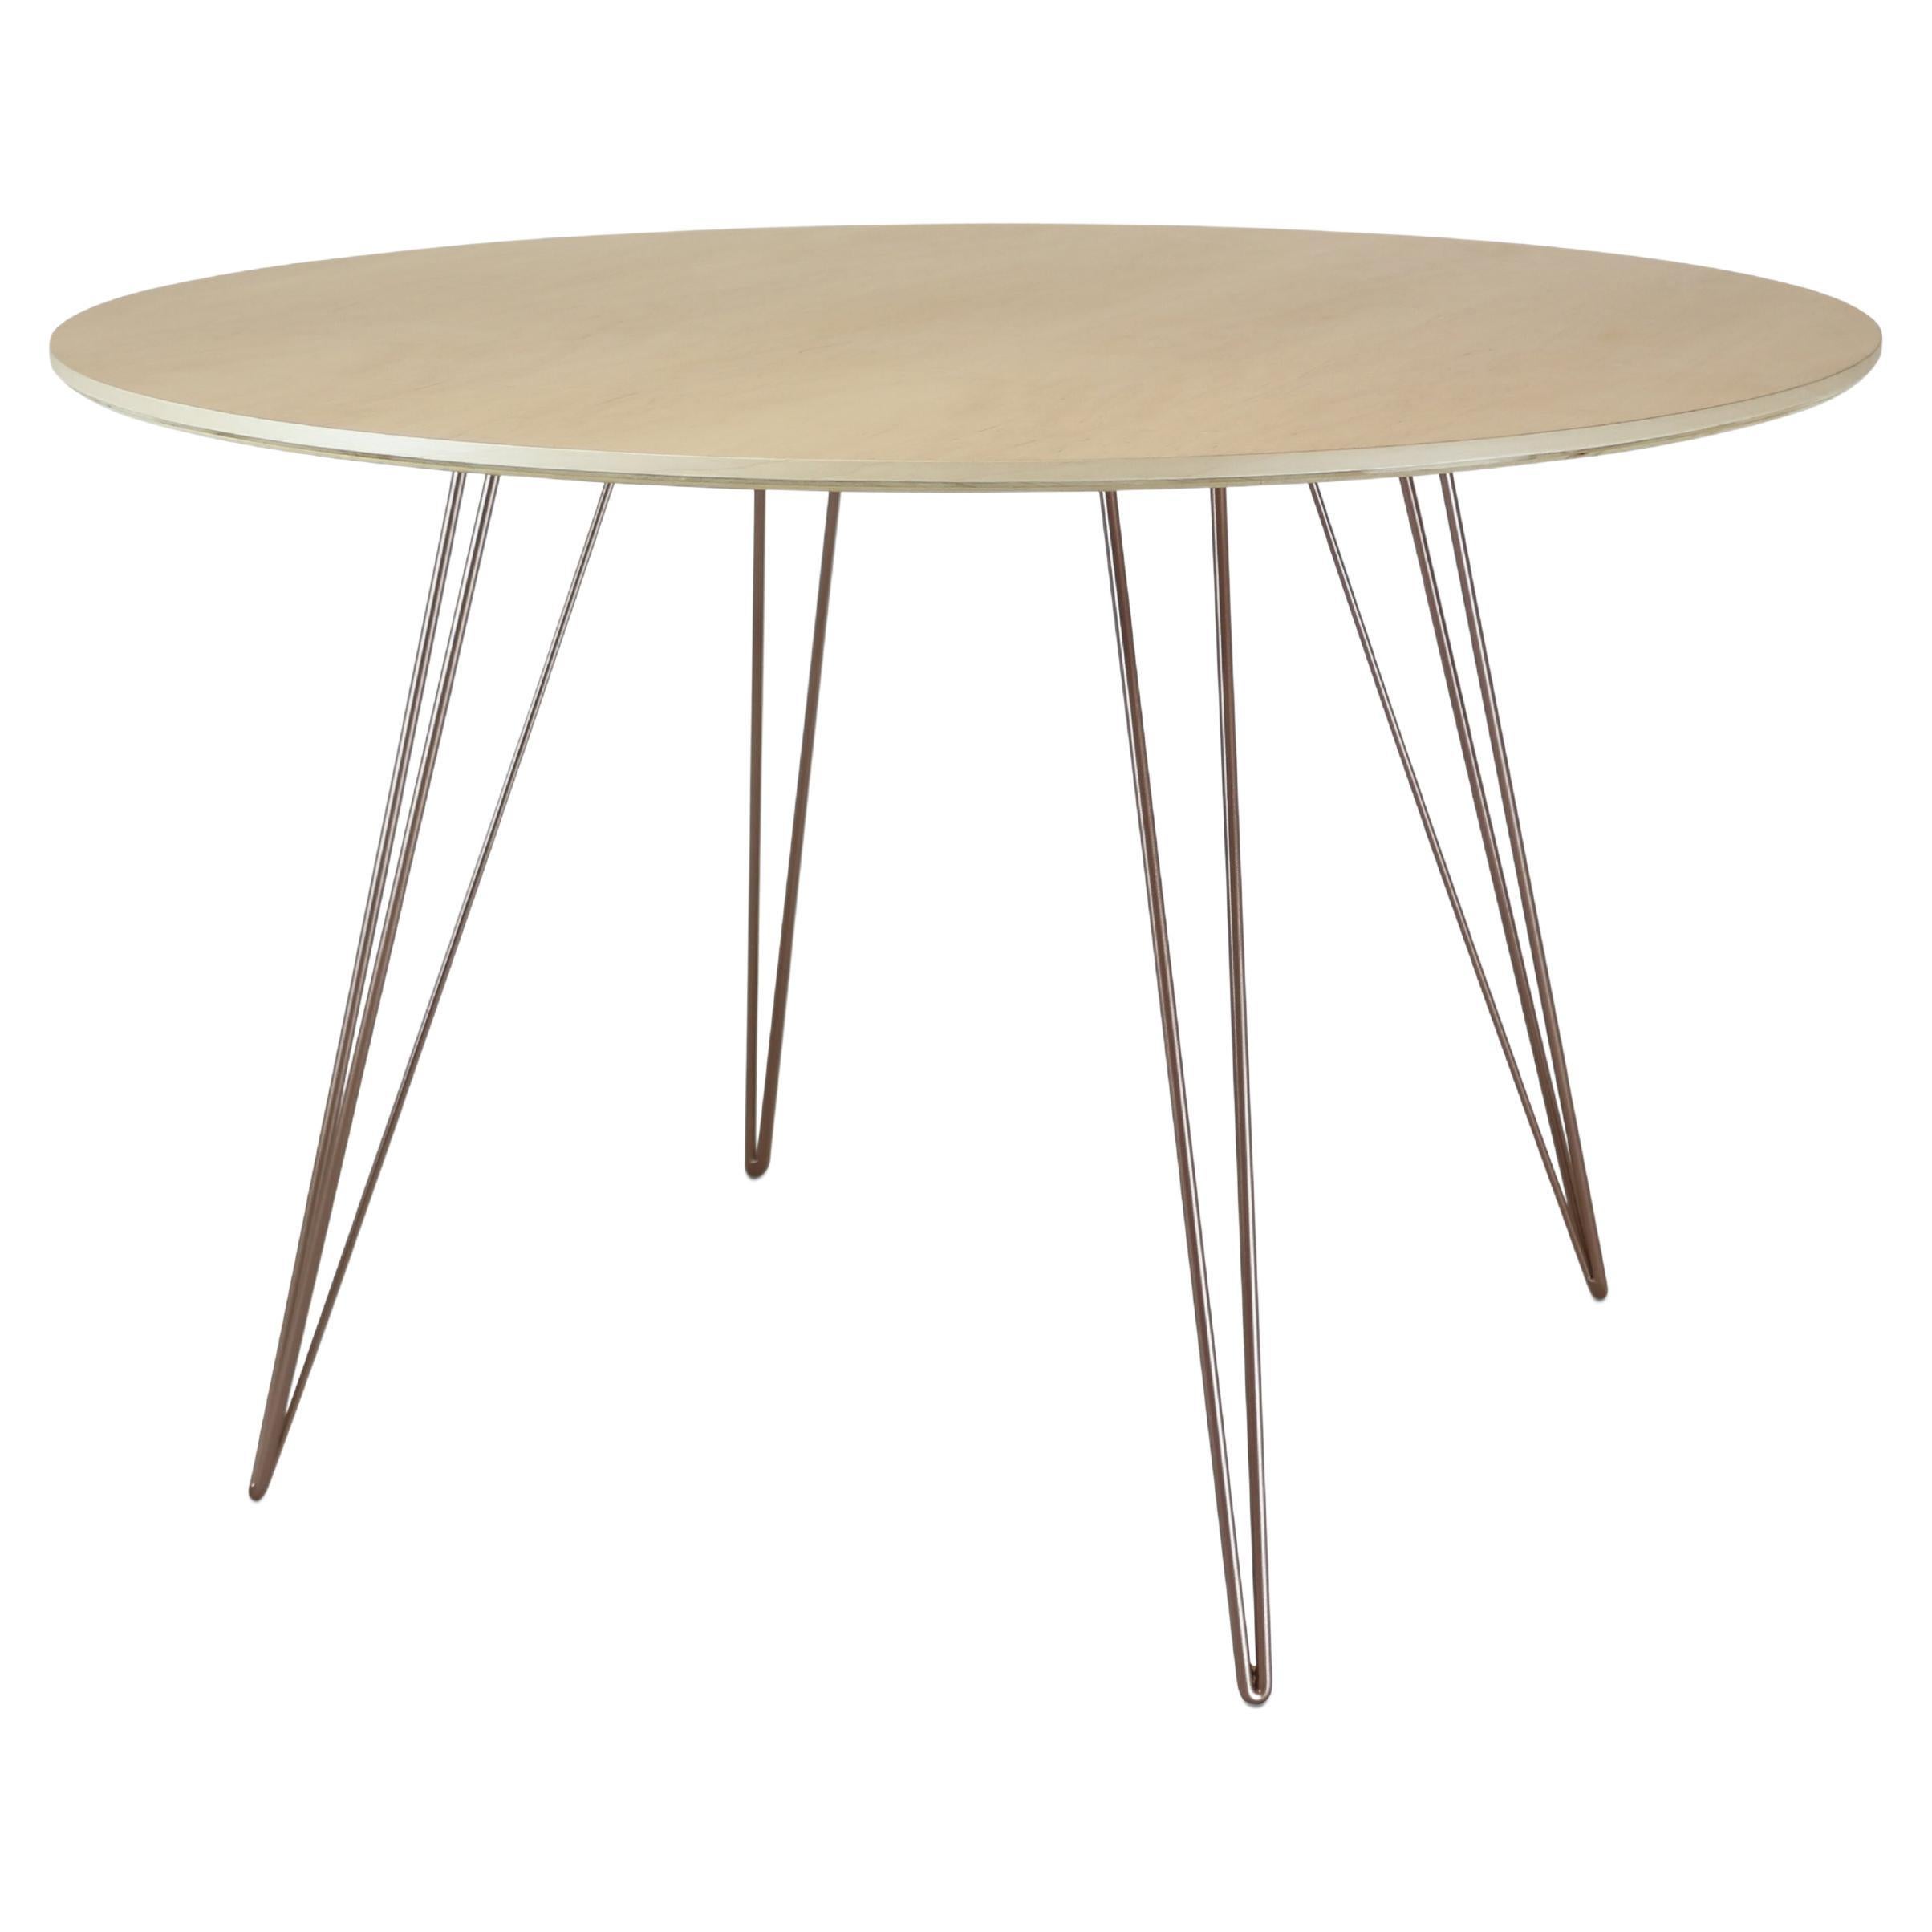 Maple Williams Dining Table Rose Copper Hairpin Legs, Circle Top